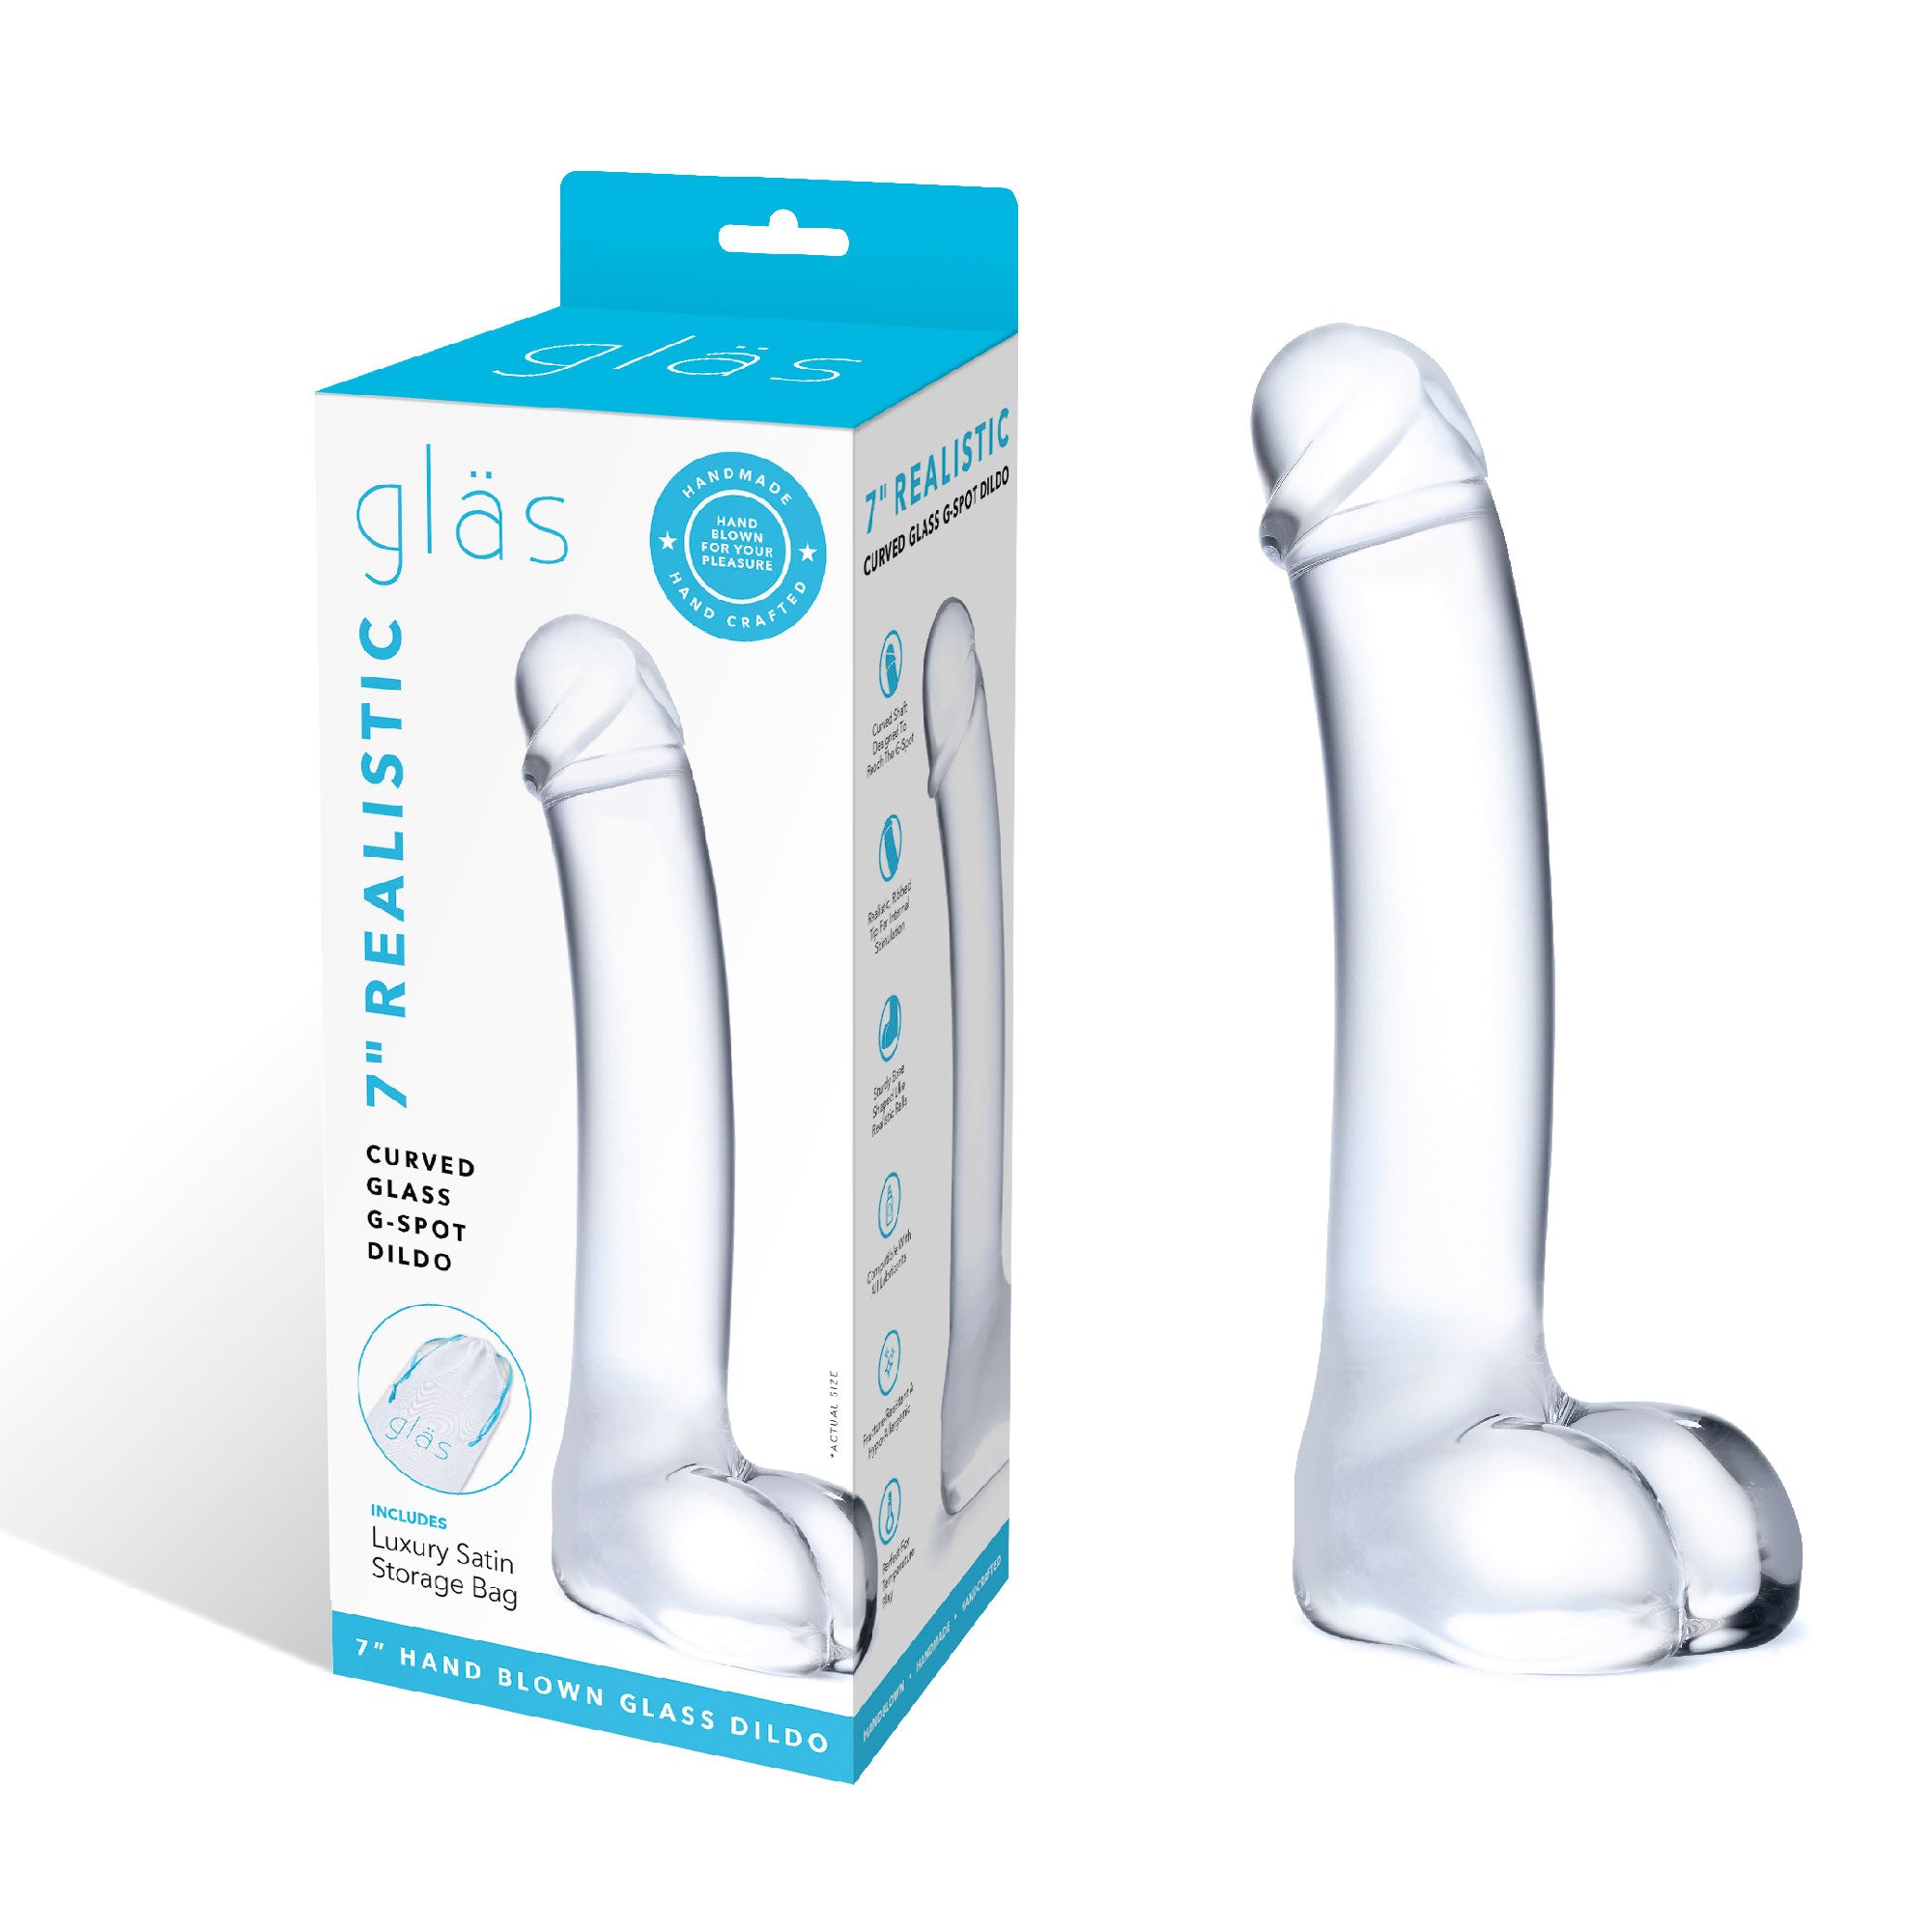 7 Inch Realistic Curved Glass G-Spot Dildo - Clear